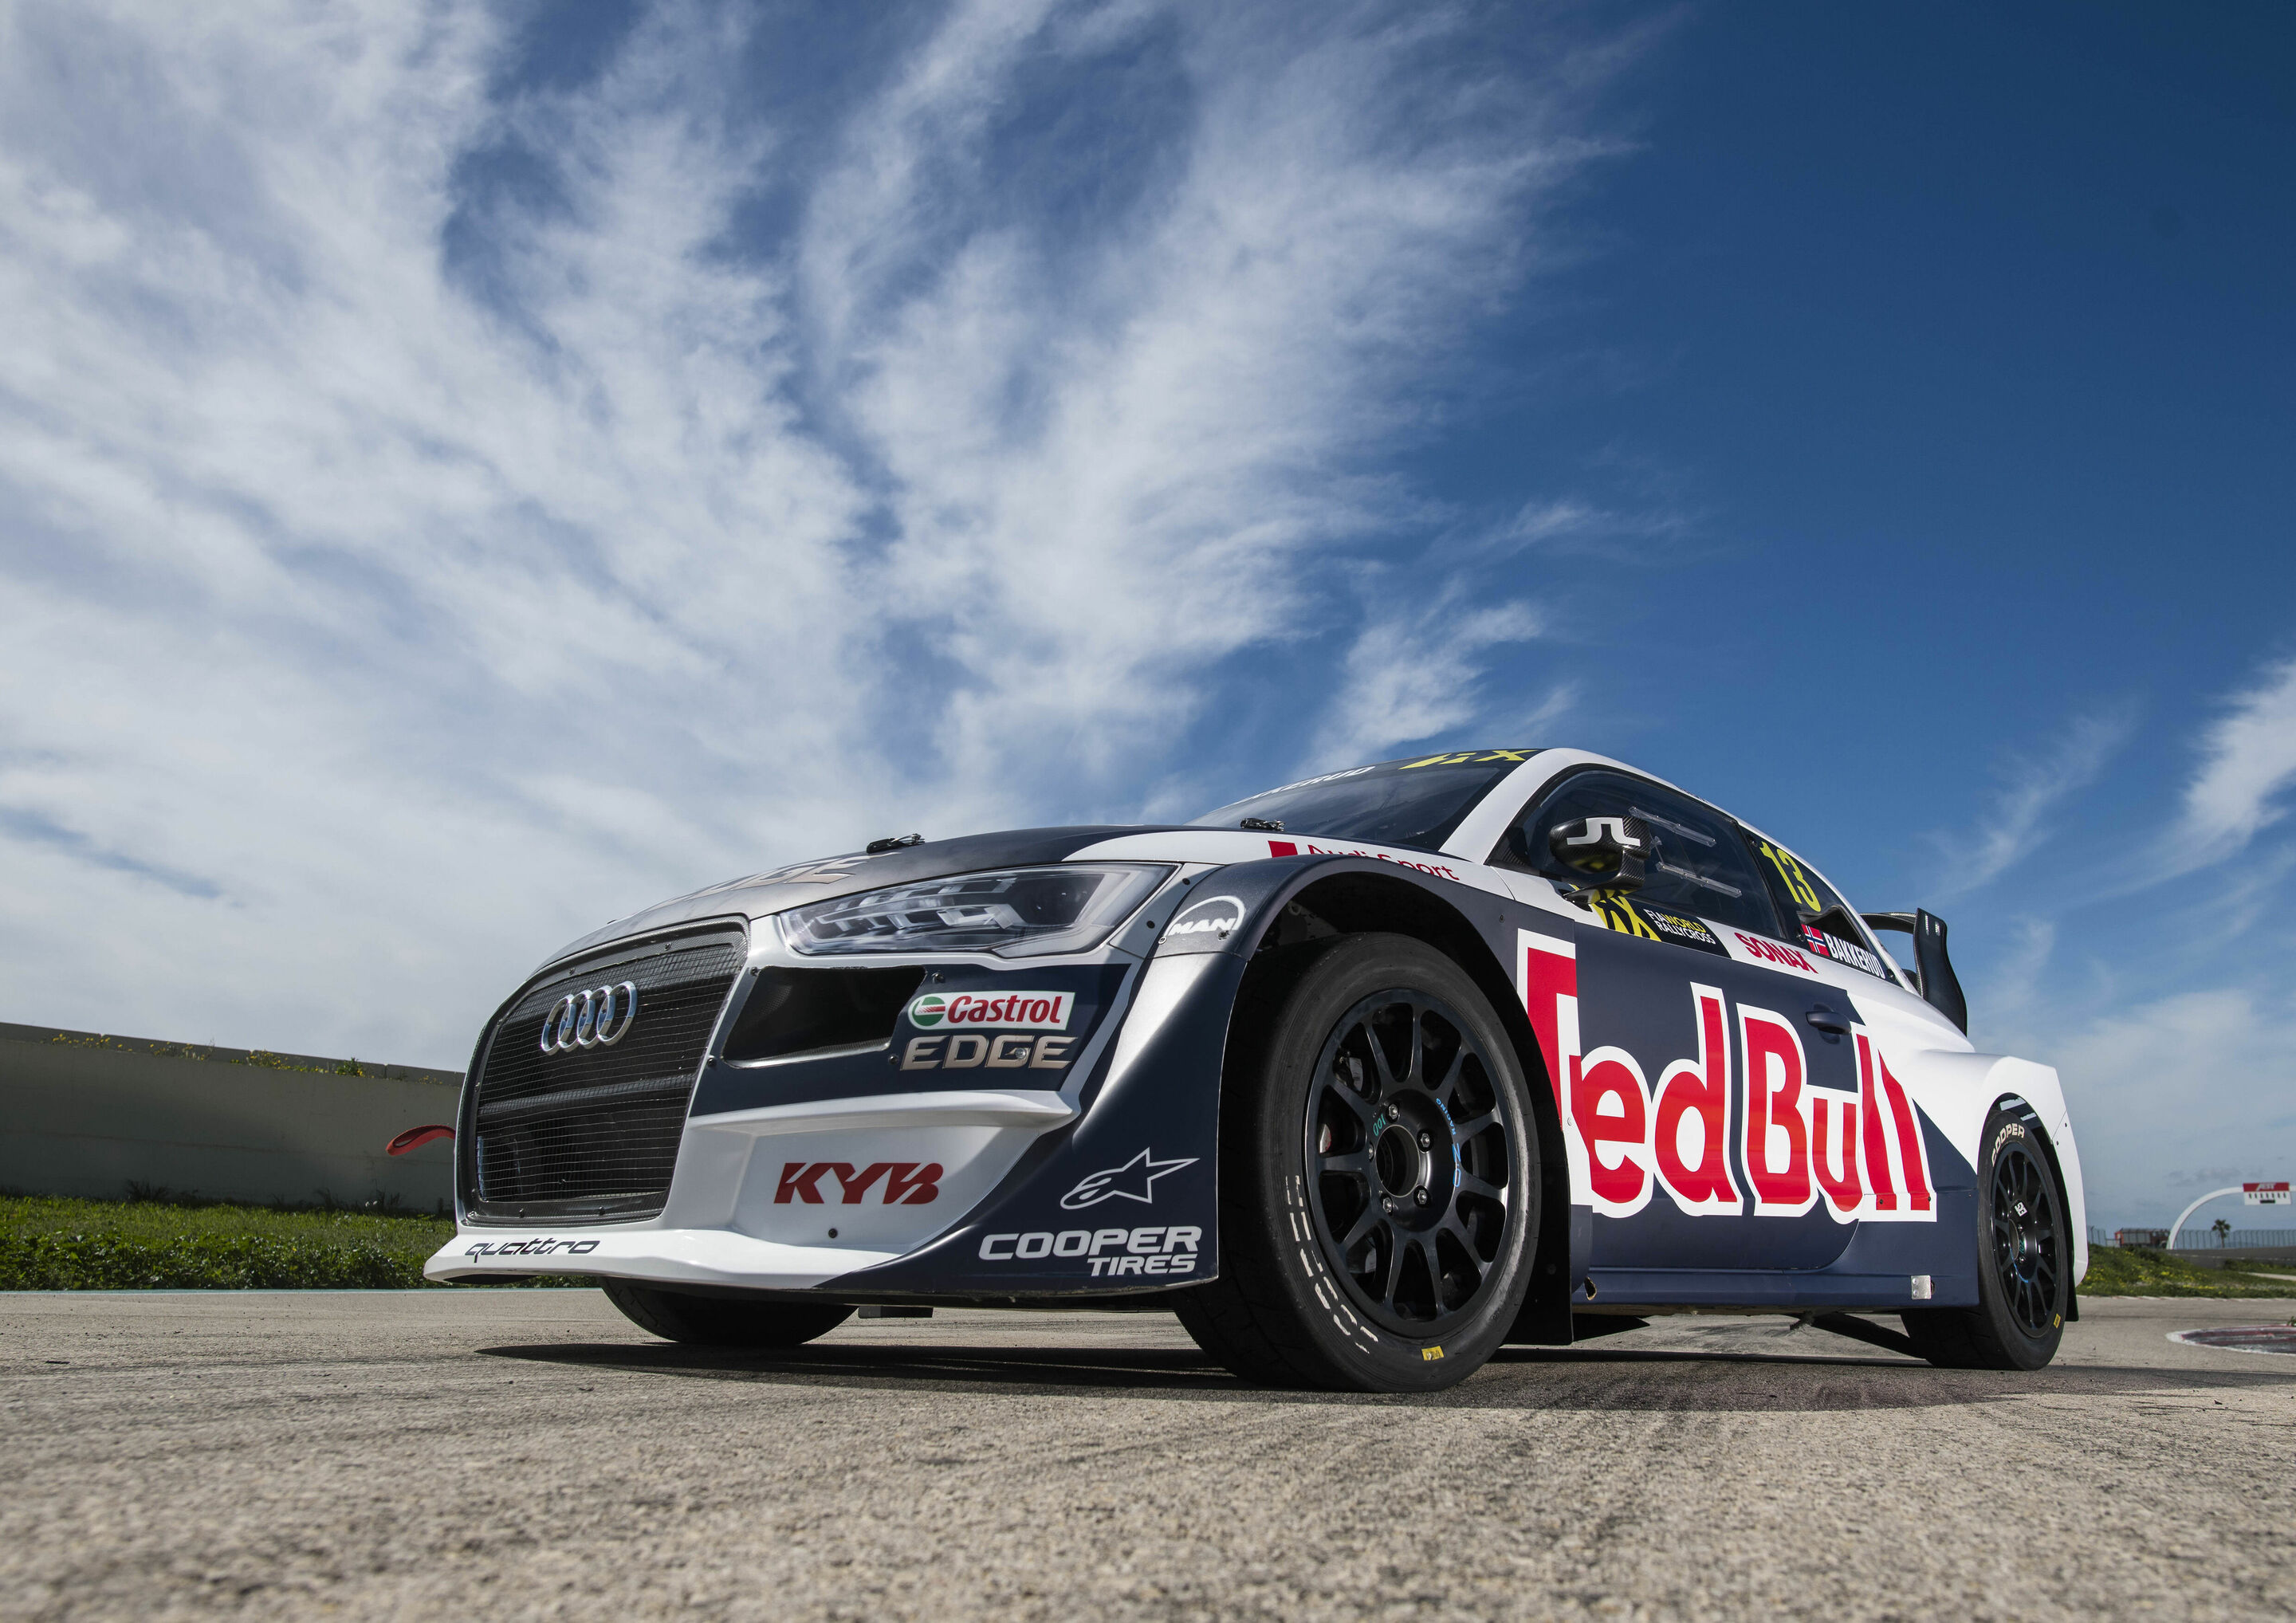 EKS Audi Sport fired up for 2018 World RX season with new package